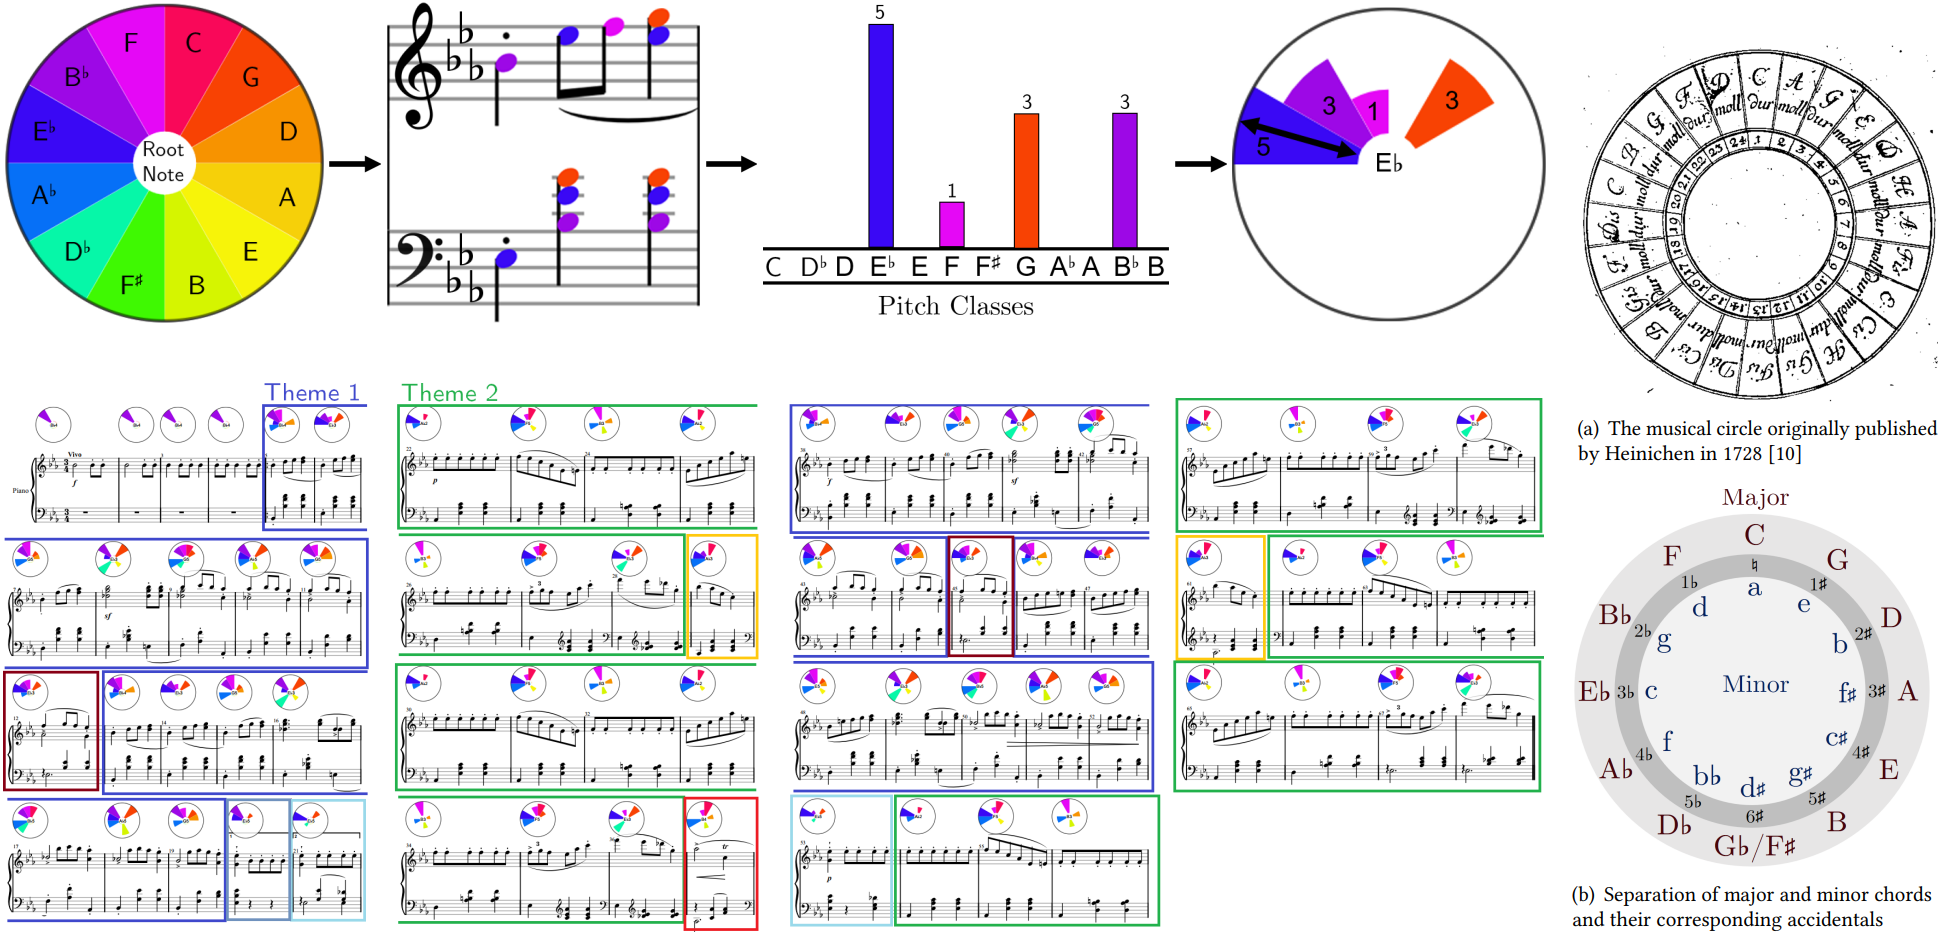 Augmenting Music Sheets with Harmonic Fingerprints (Best Paper Award)